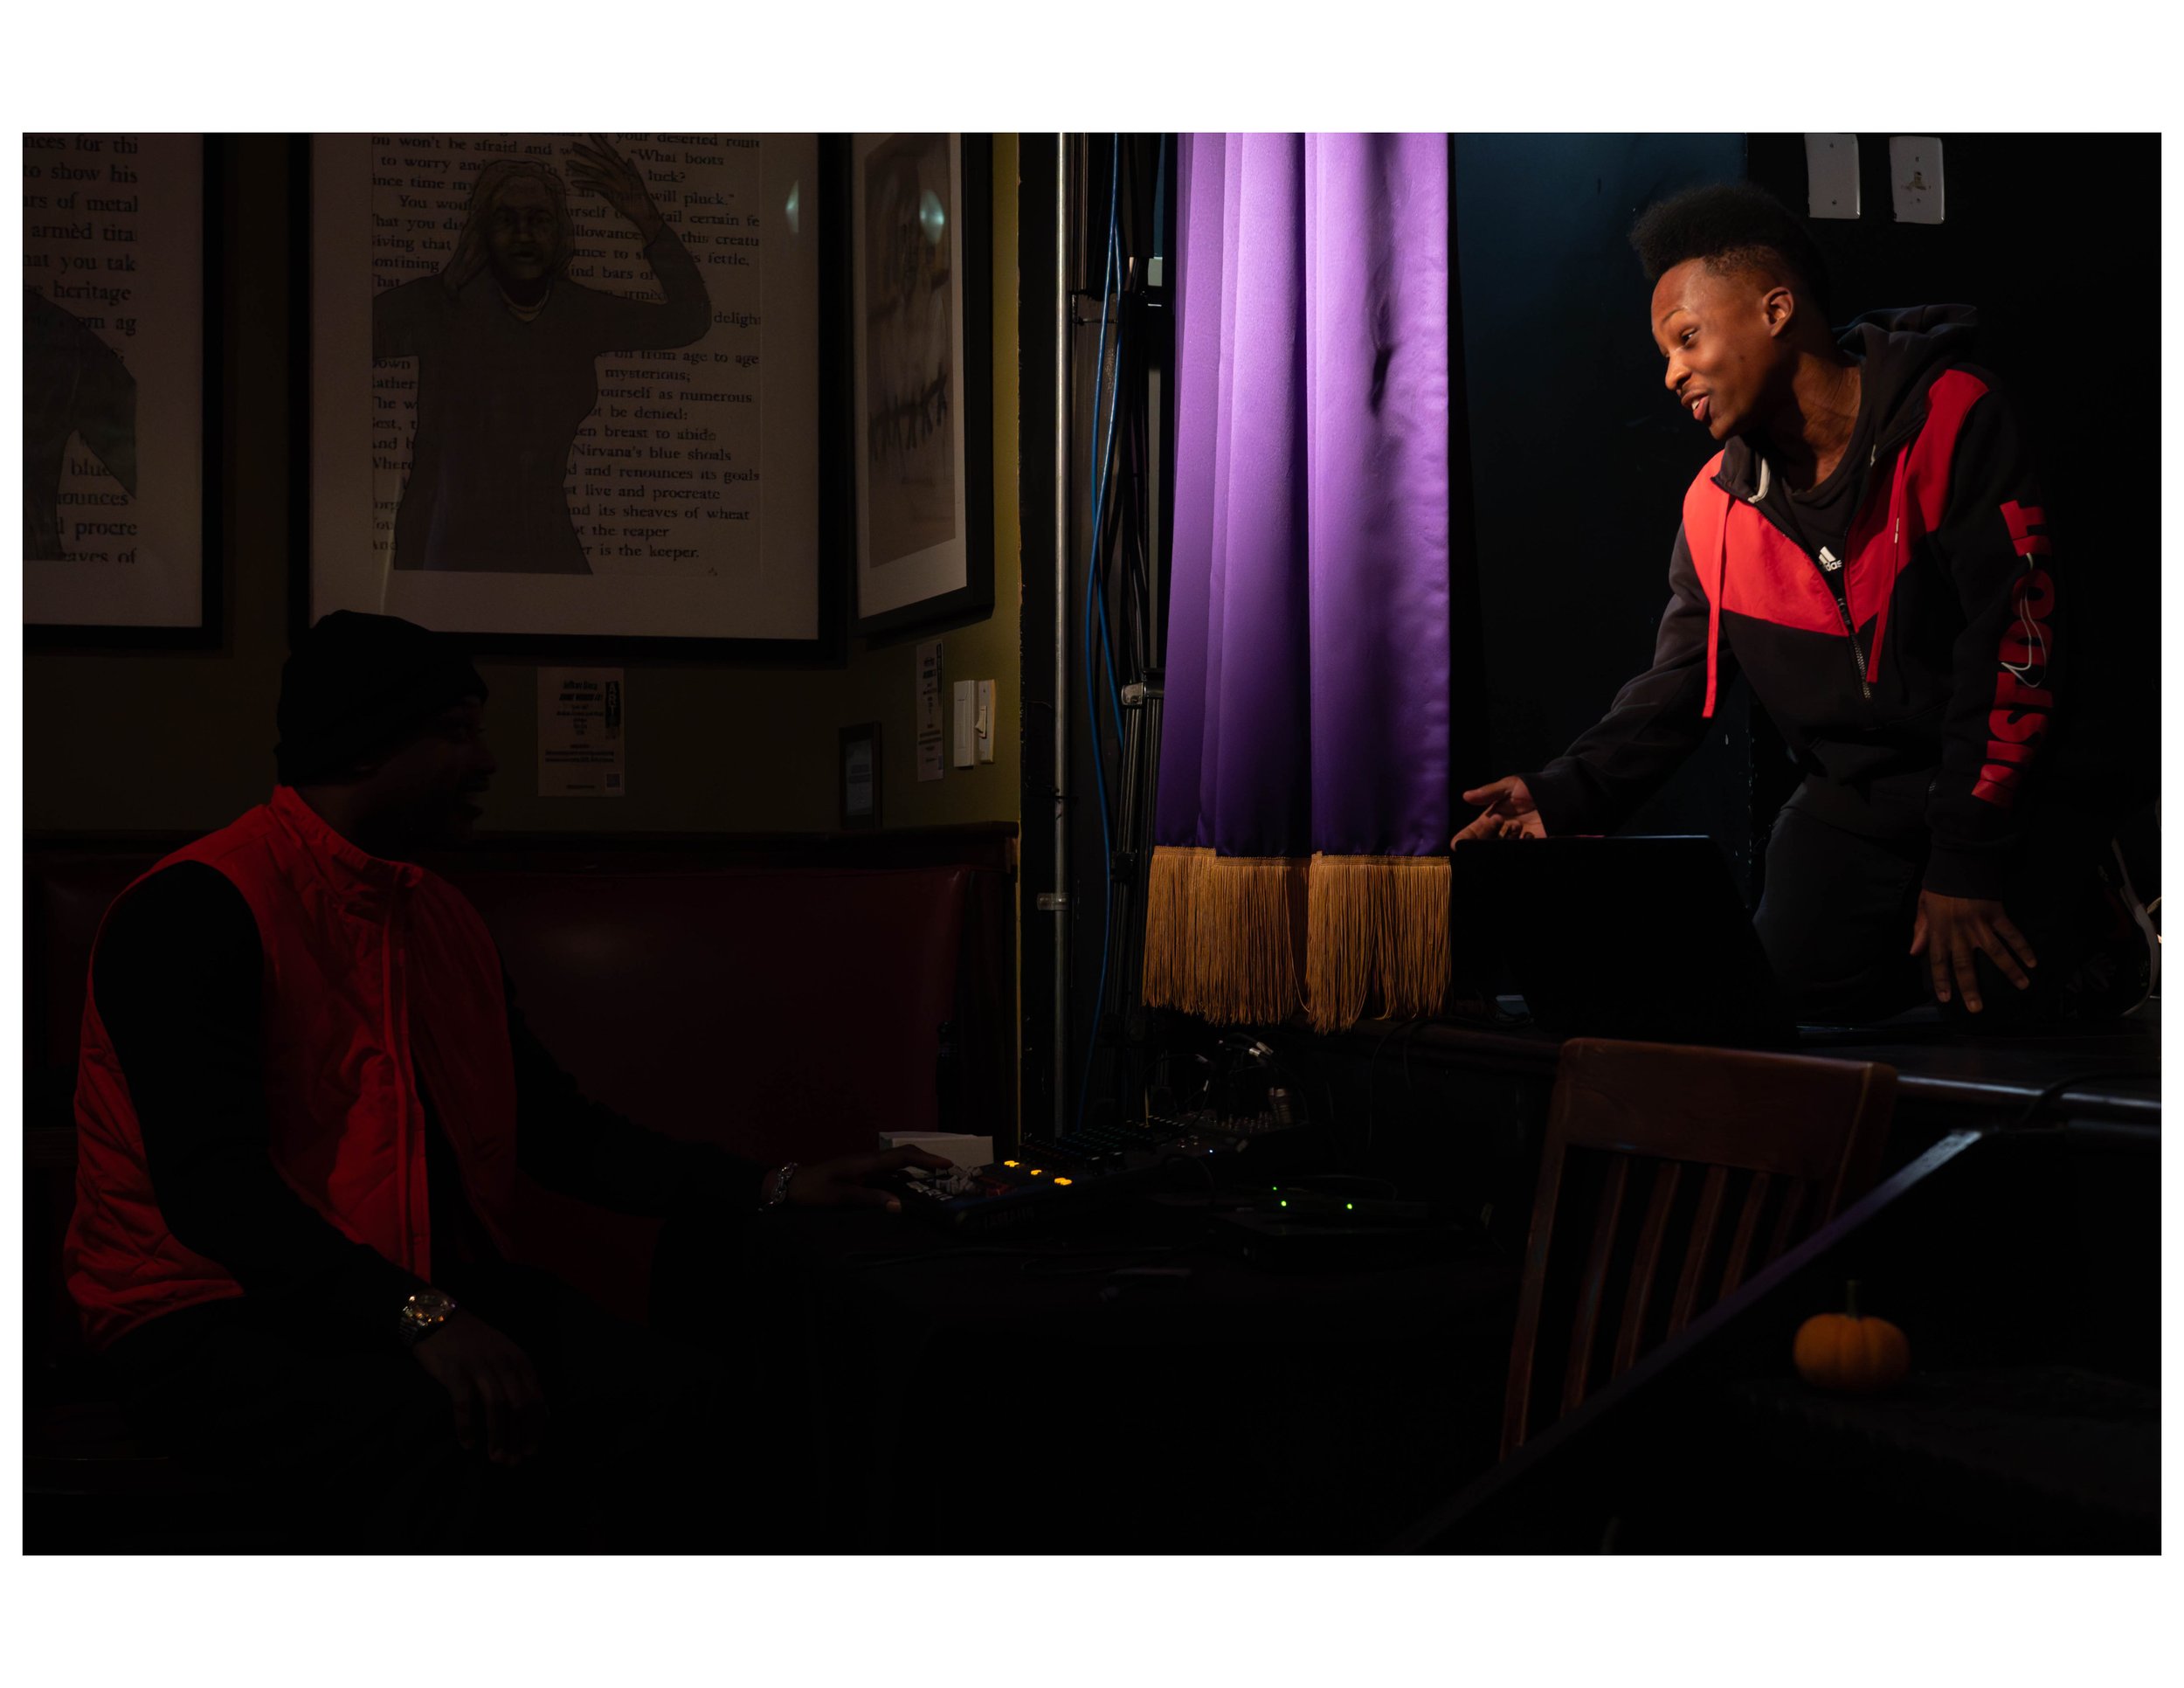   Youth Poet Mica Super performs an original song at an open mic event hosted by Words Beats &amp; Life Inc. at Busboys and Poets in Washington, DC. Photographer/Victoria Ford  